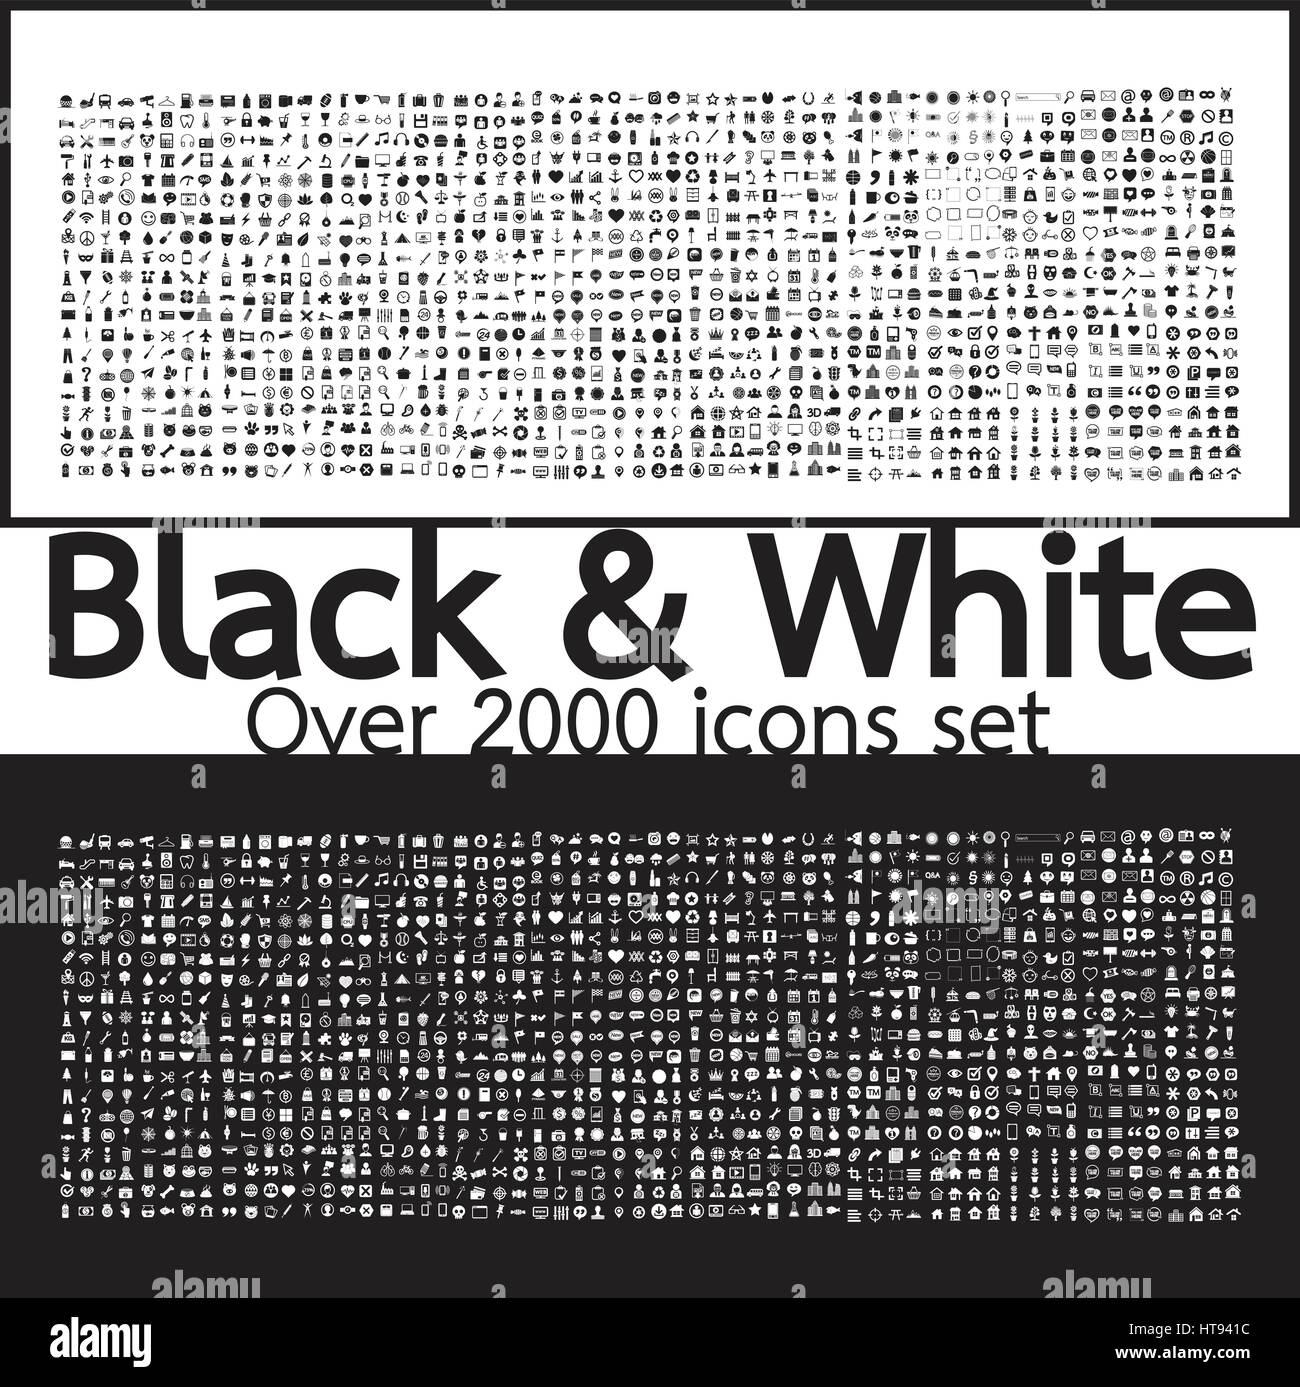 Over 2000 Black and White Set icons Quality illustration design Stock Vector